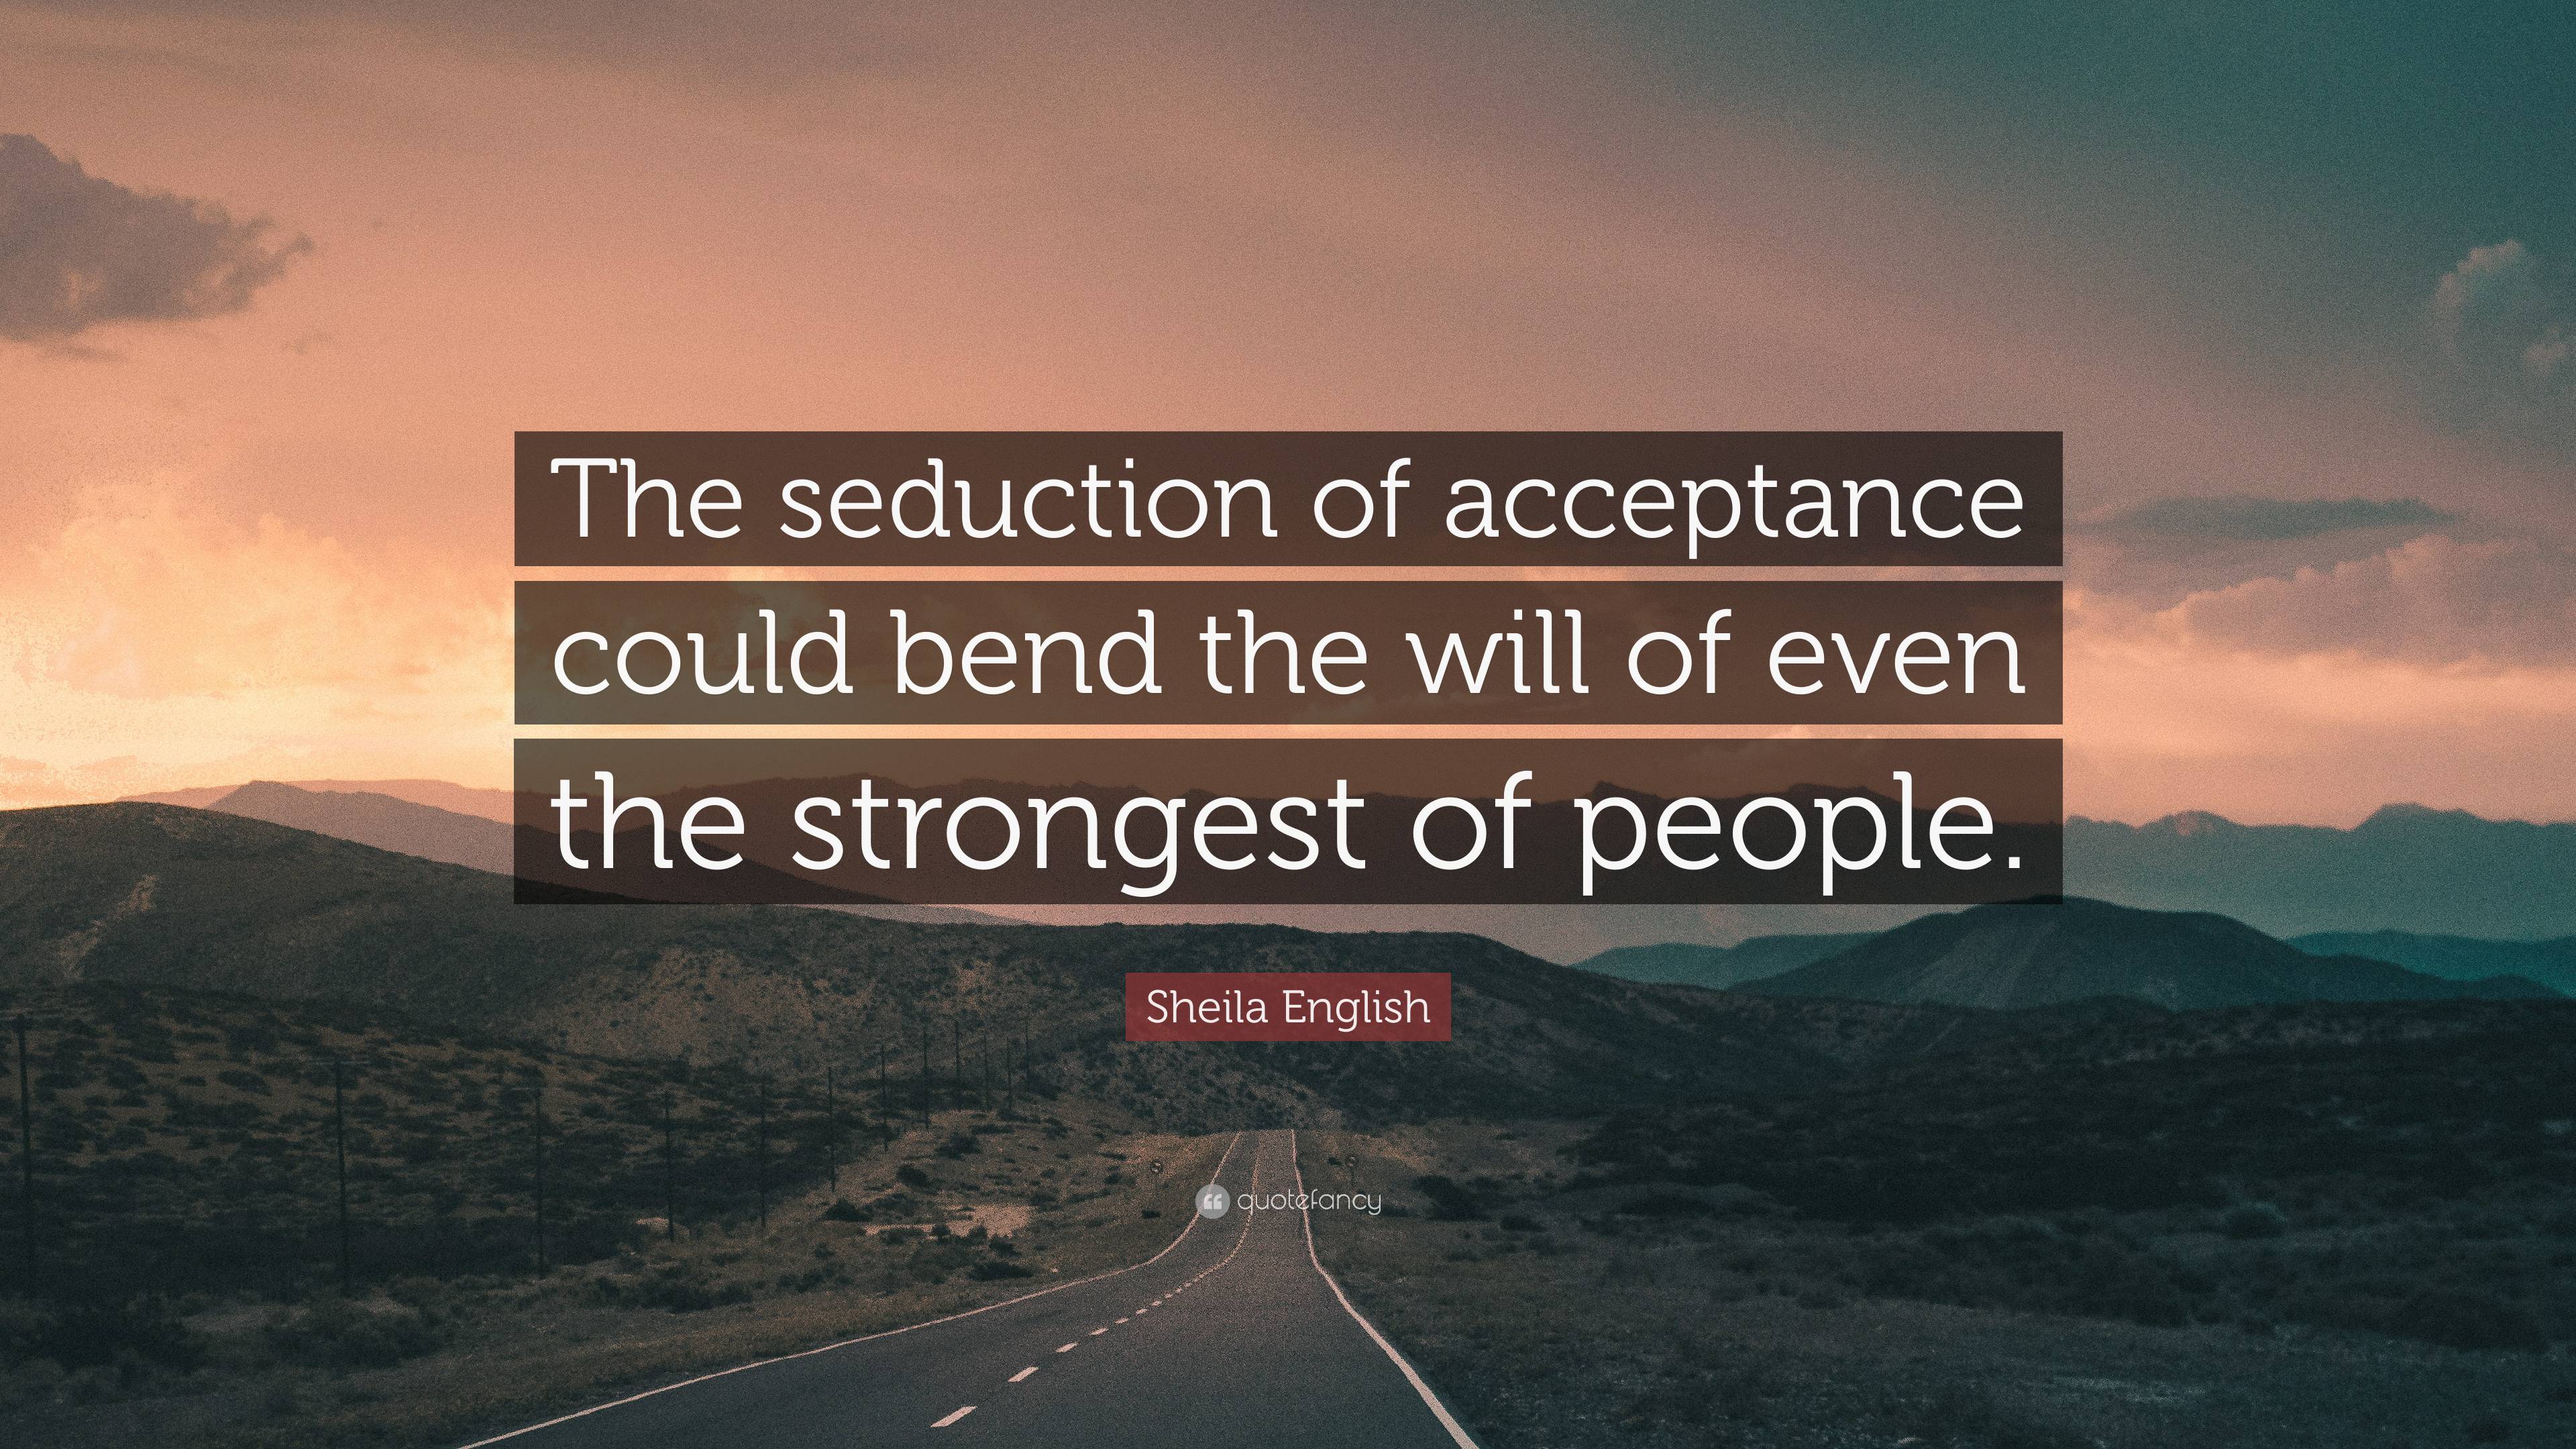 Sheila English Quote: “The seduction of acceptance could bend the will ...